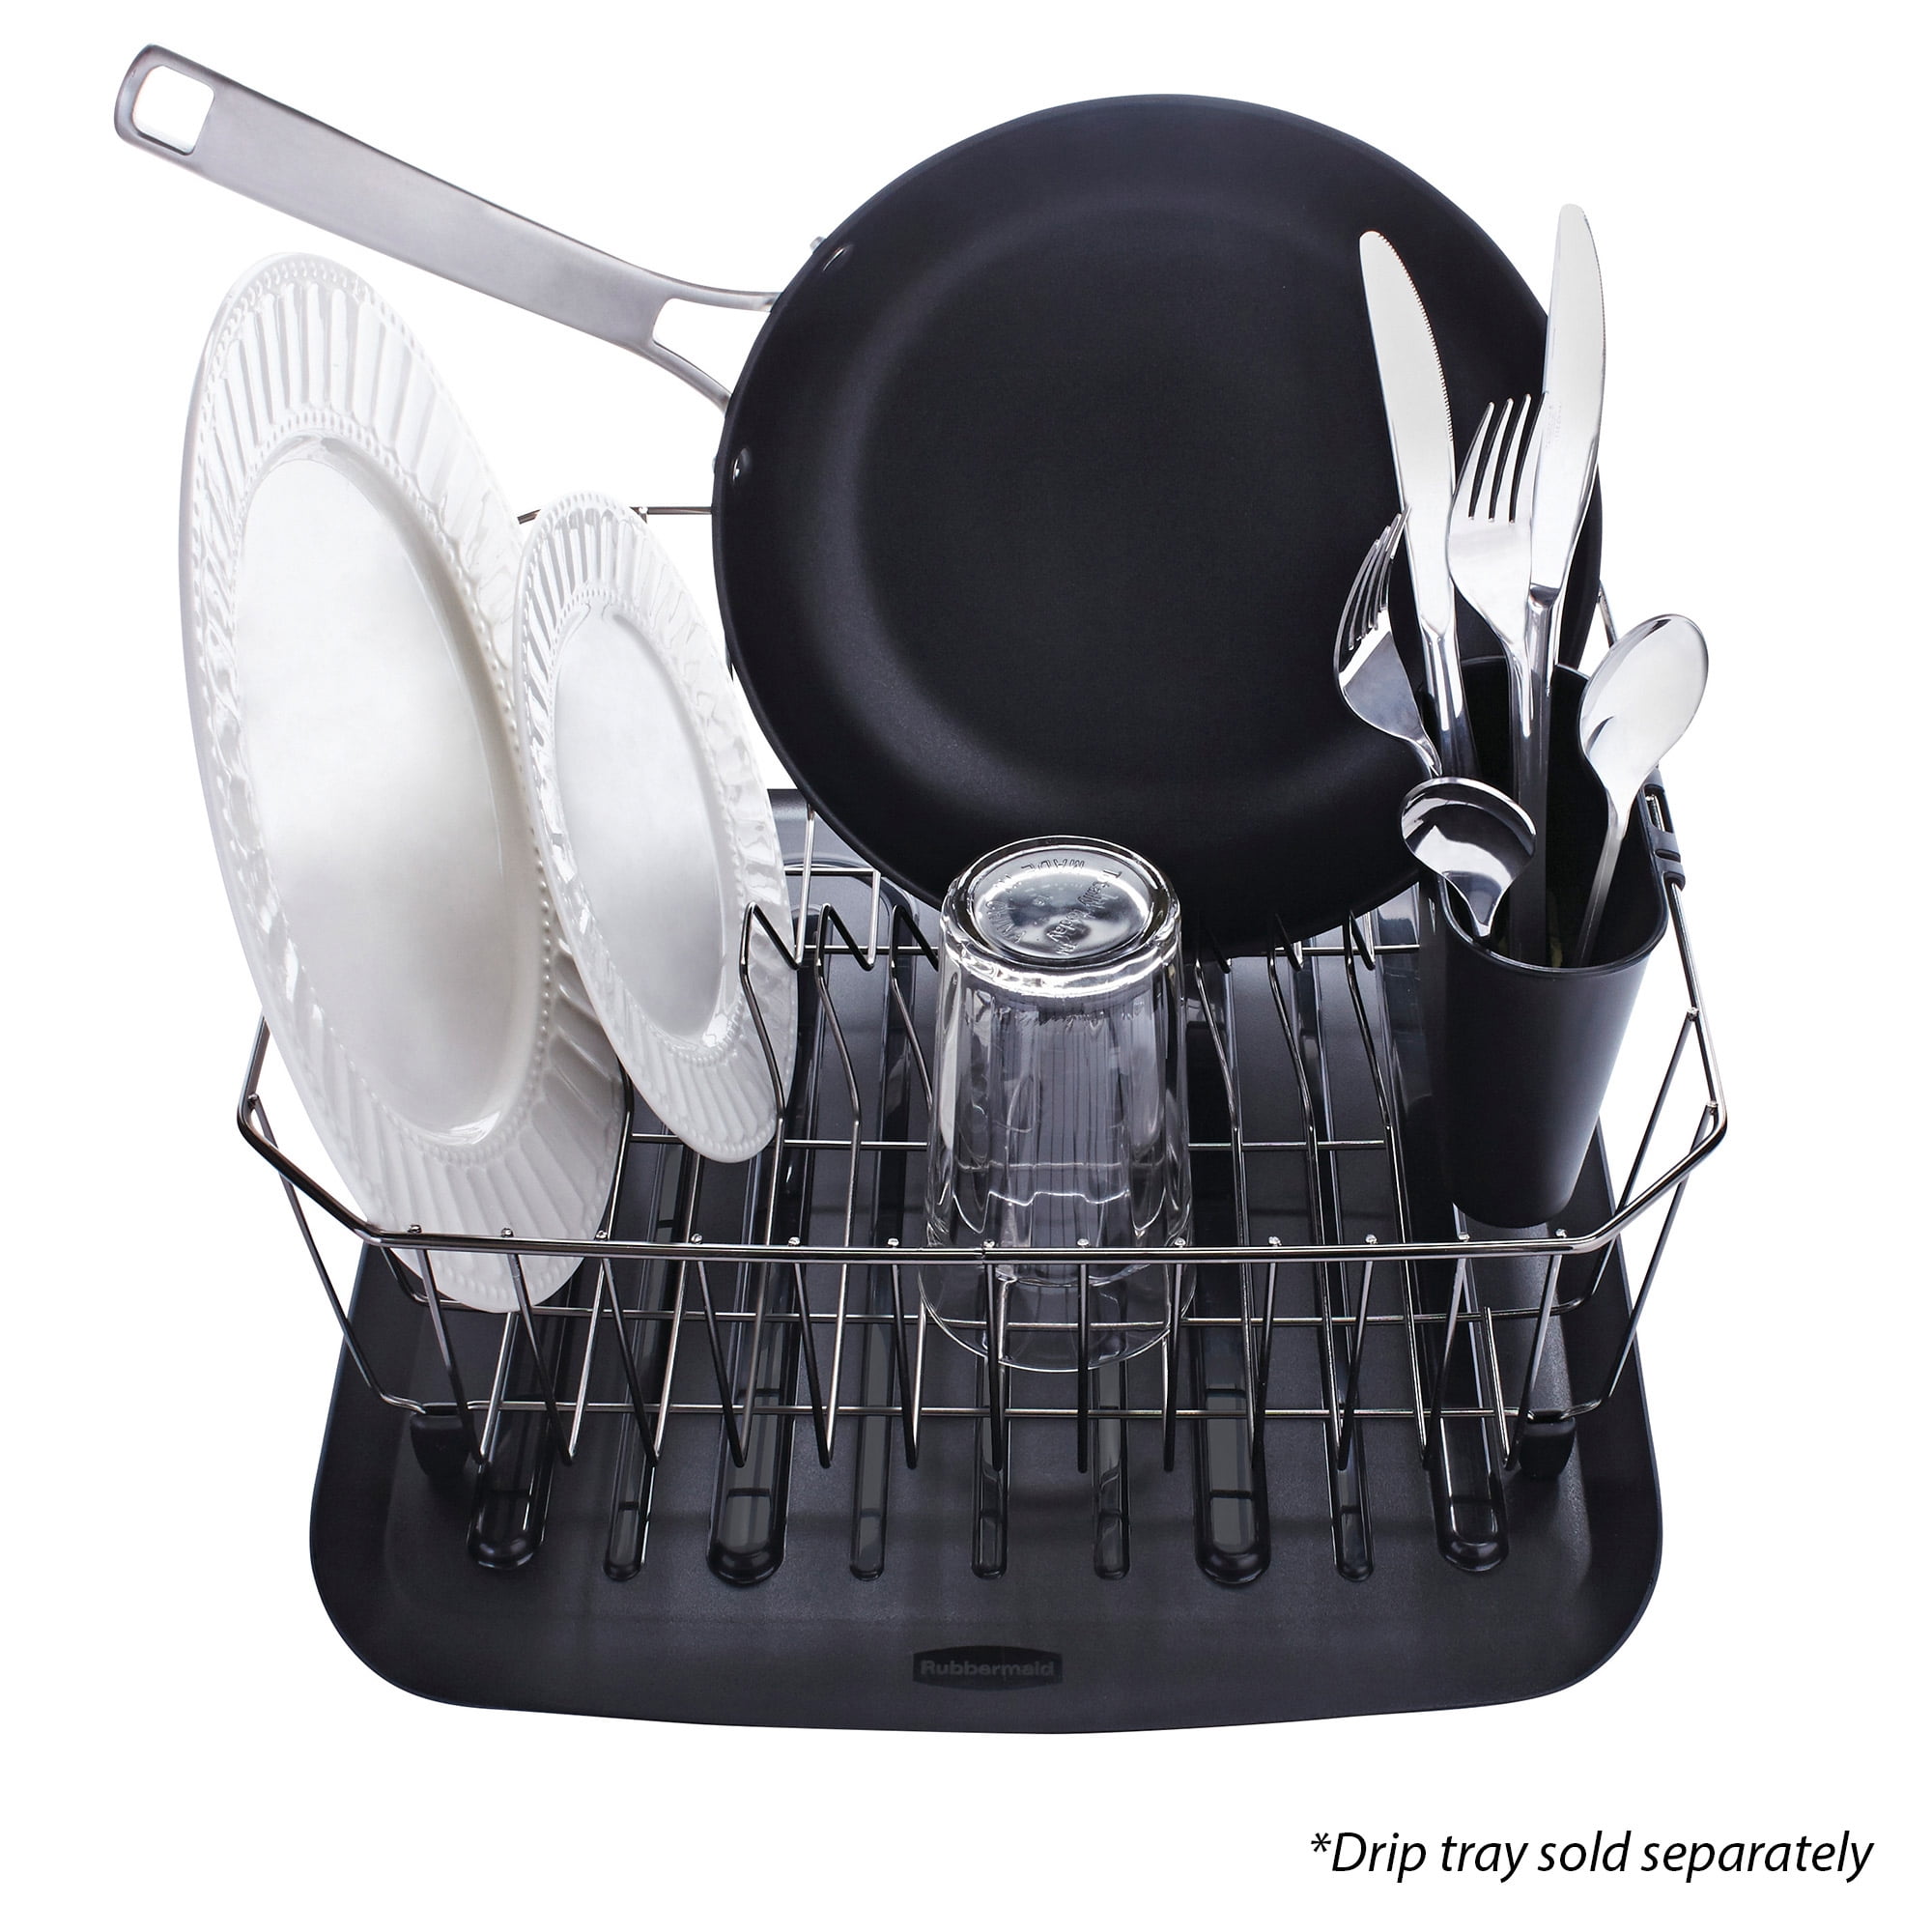 Aerdream Dish Drainer 1 Set Organization Save Space Useful with Drip Pad Dish Drying Rack, Black